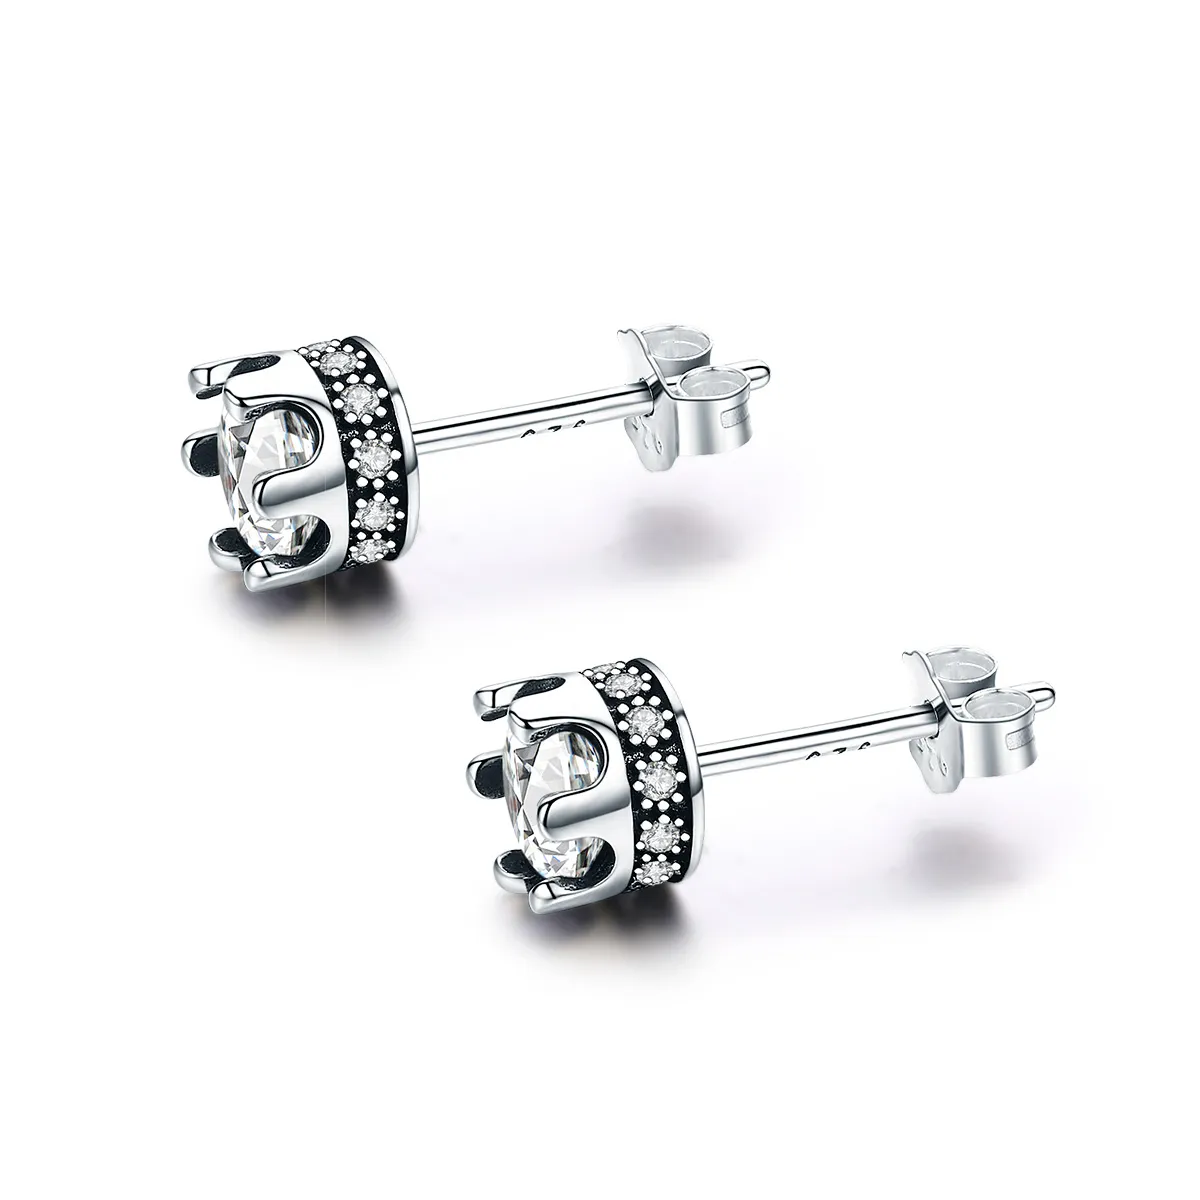 Pandora Style Silver Sparkly Crown Stud Earrings - SCE311